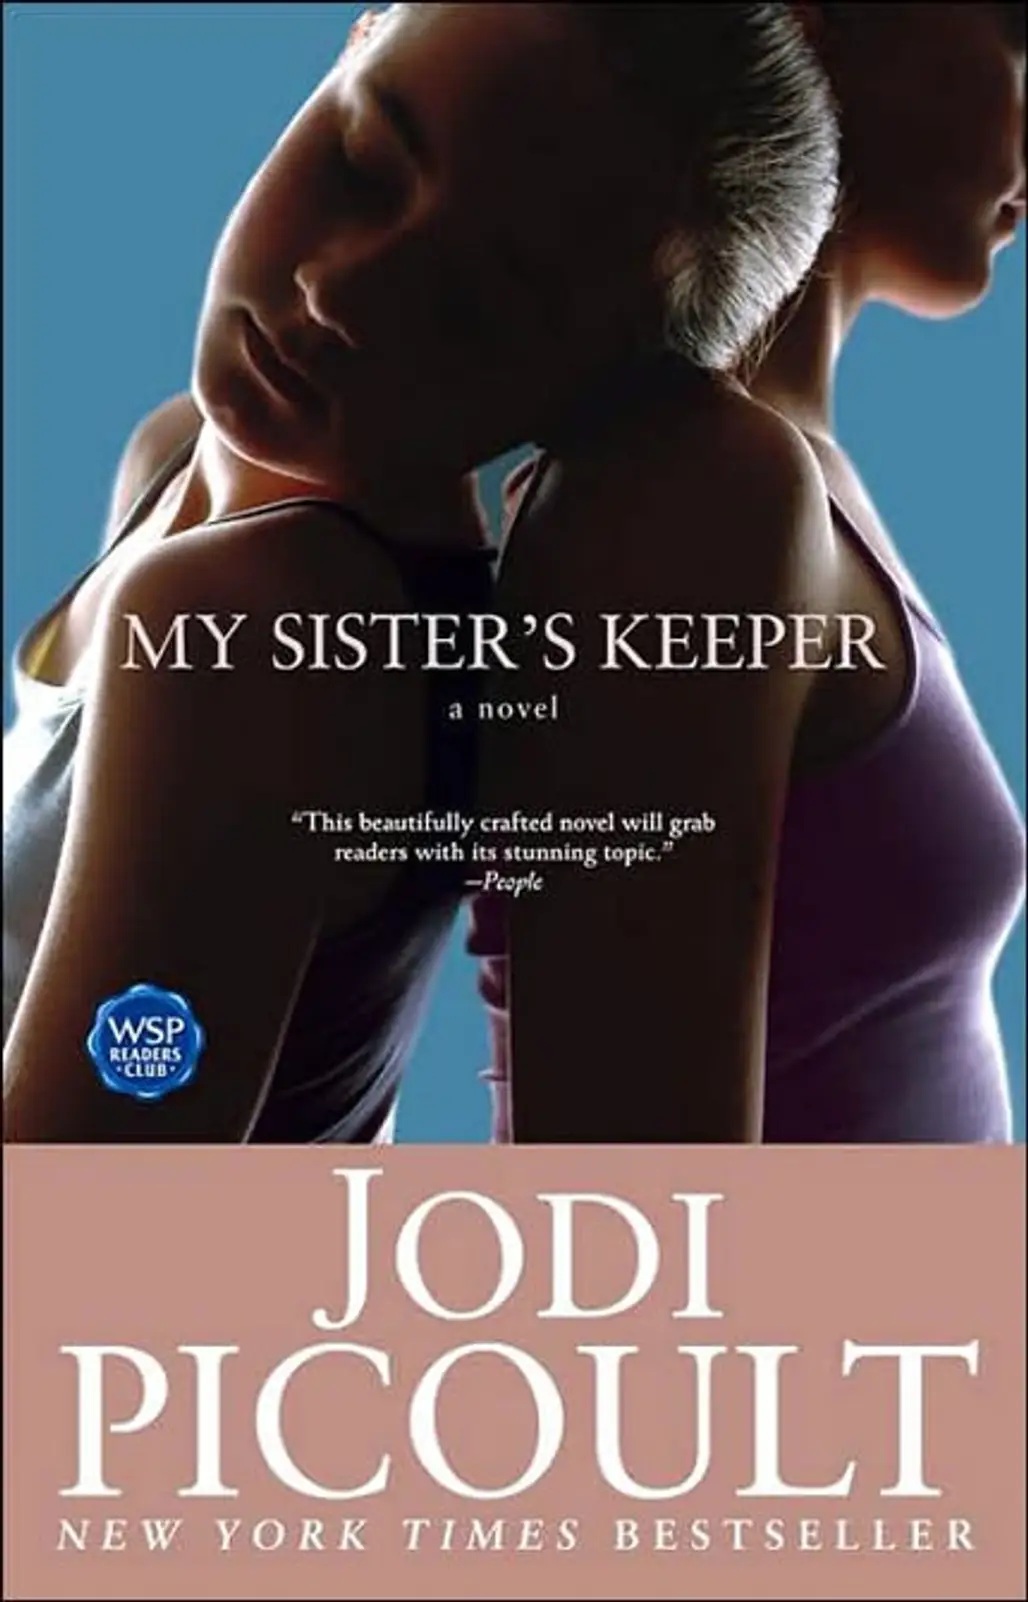 My Sister’s Keeper by Jody Picoult